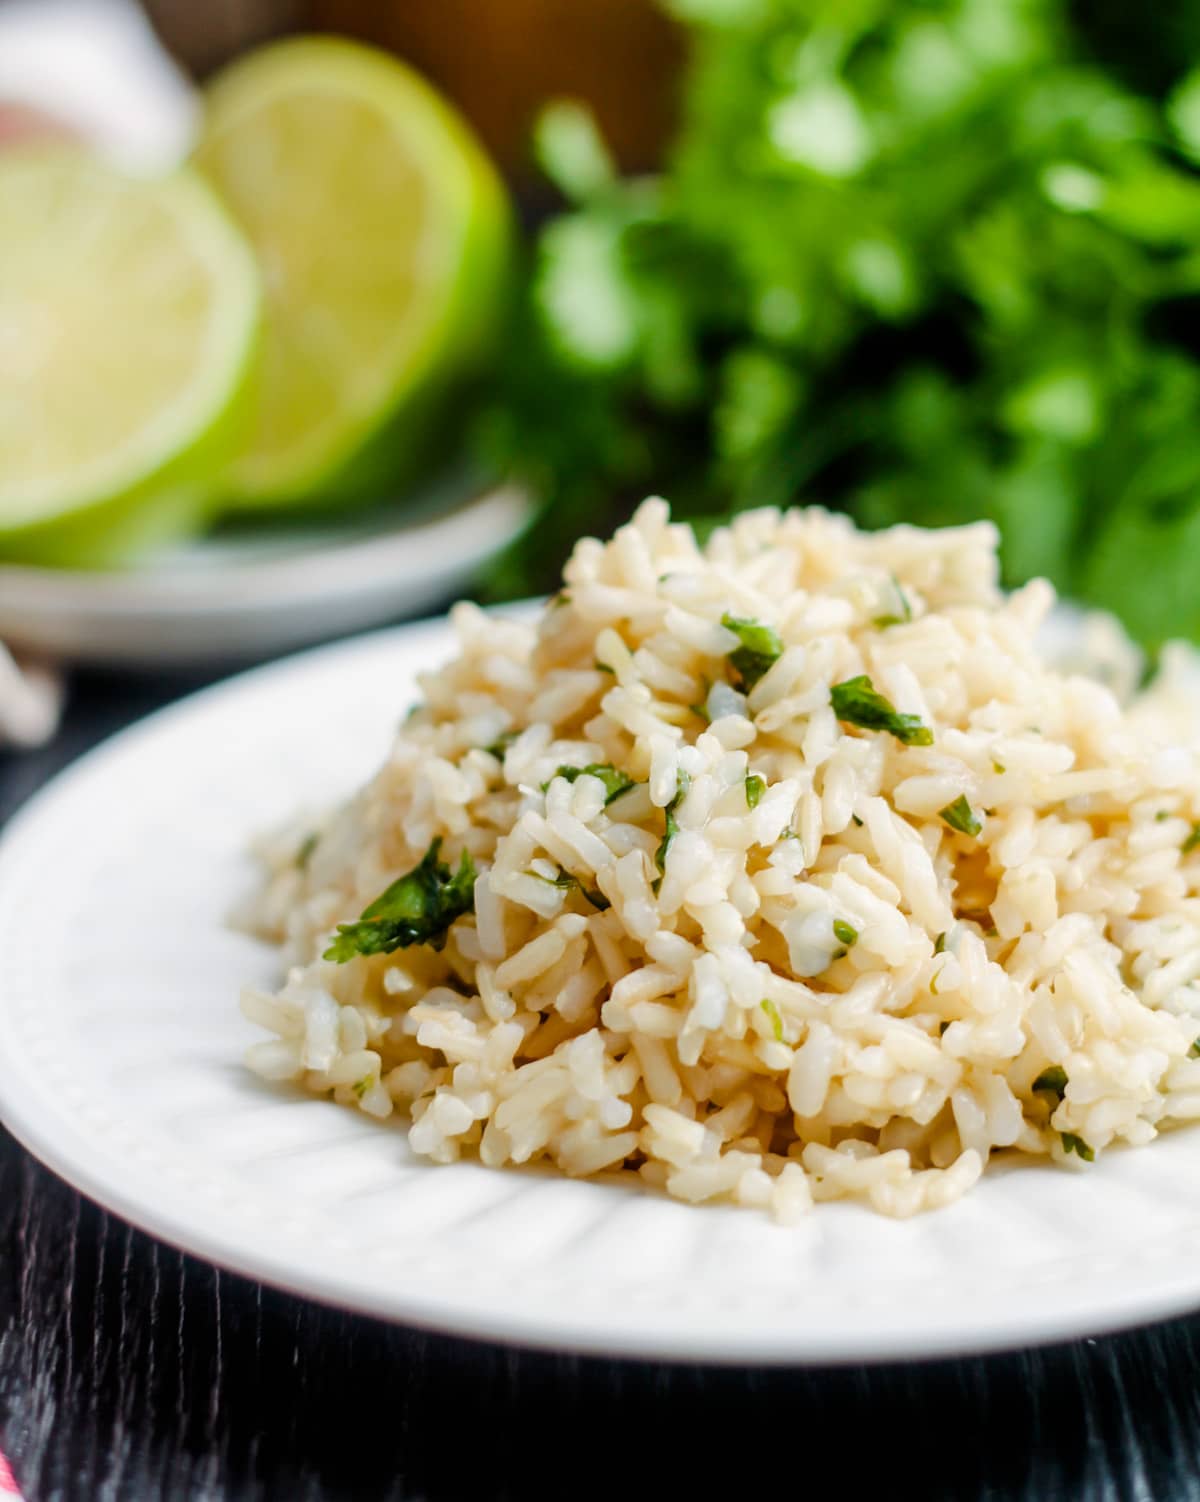 A plate of cilantro brown rice.